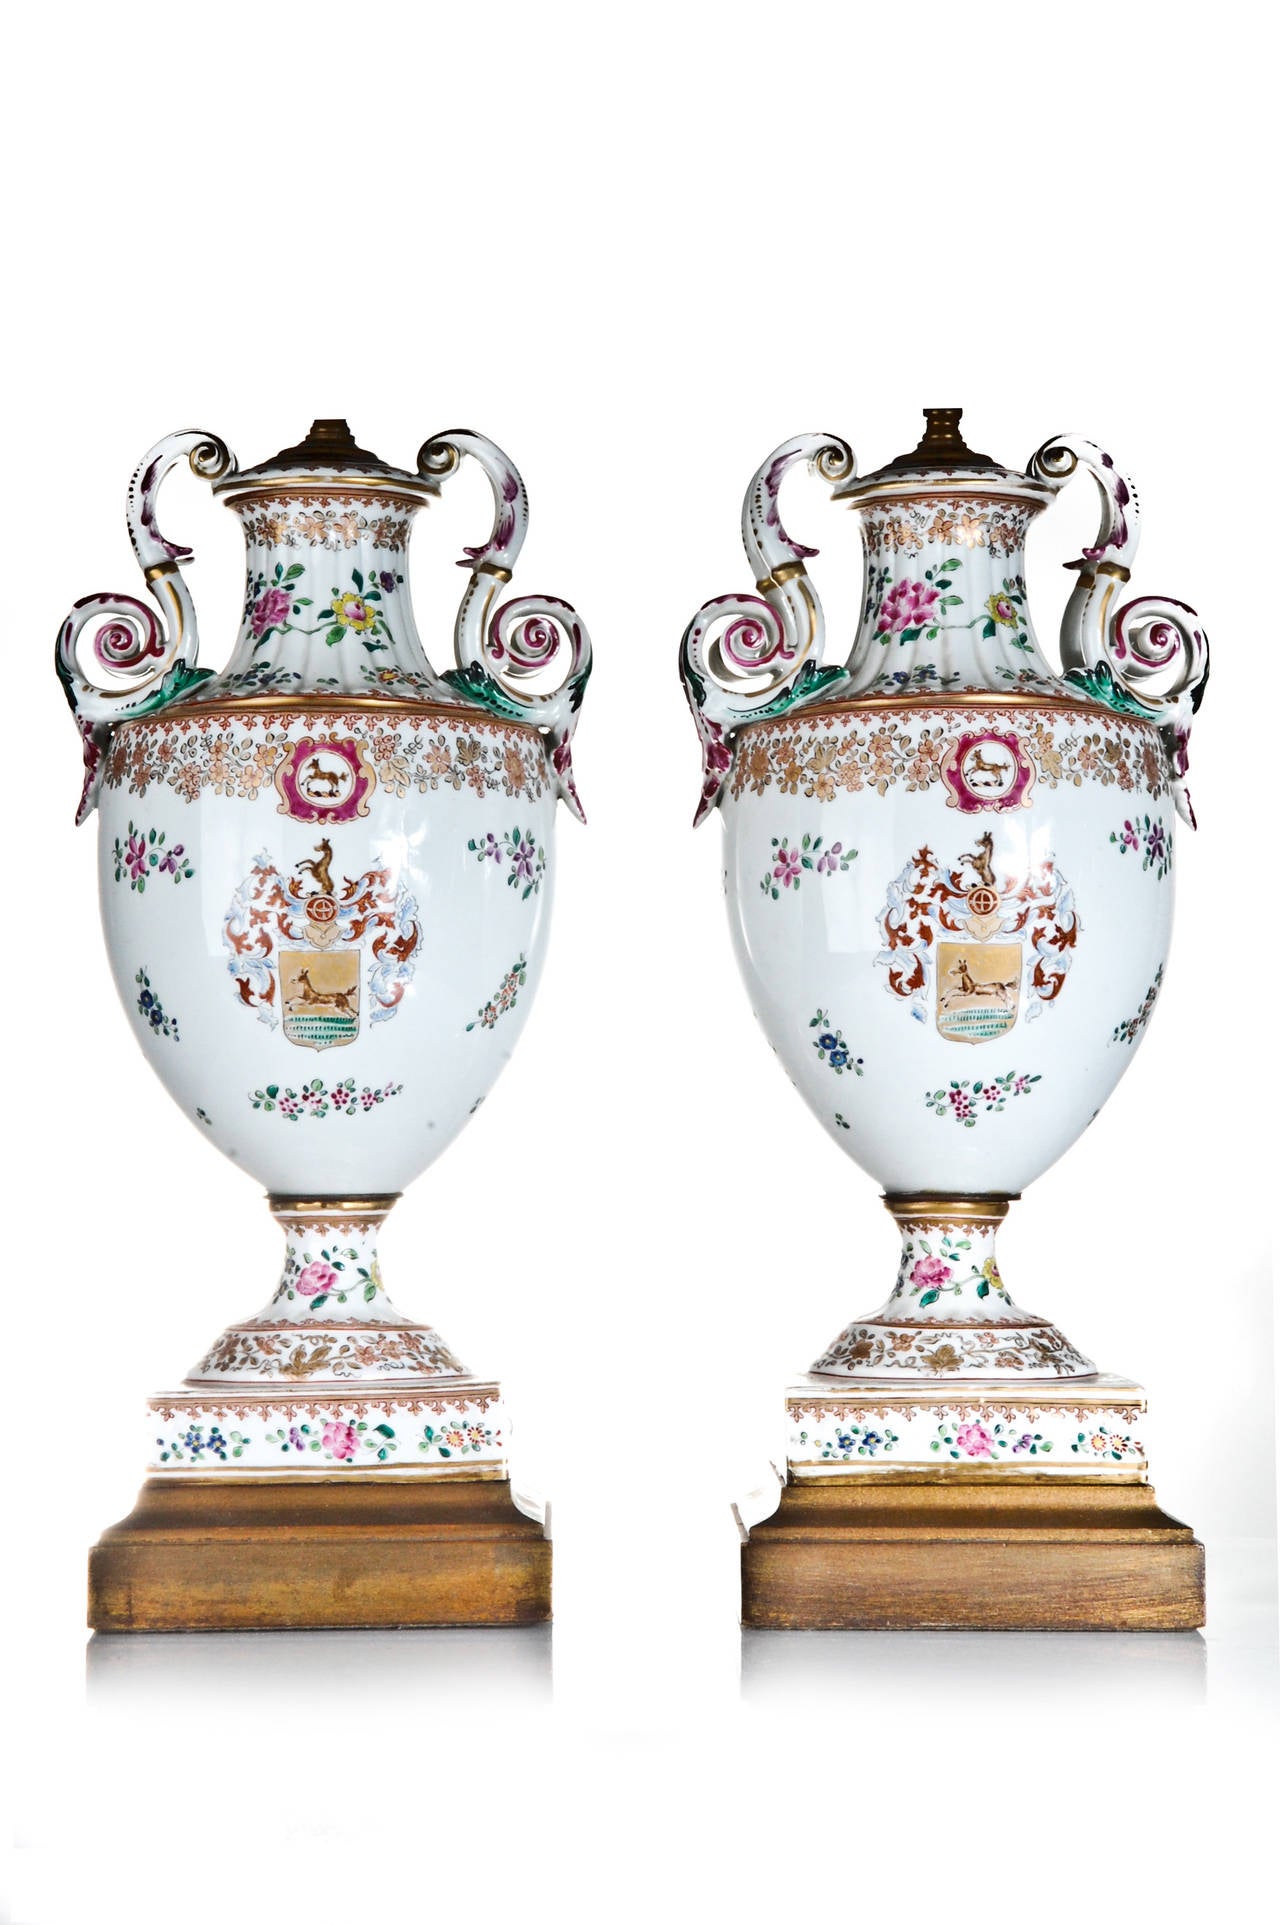 A Pair of Fine Antique French Louis XVI style enameled and gilded porcelain lamps.